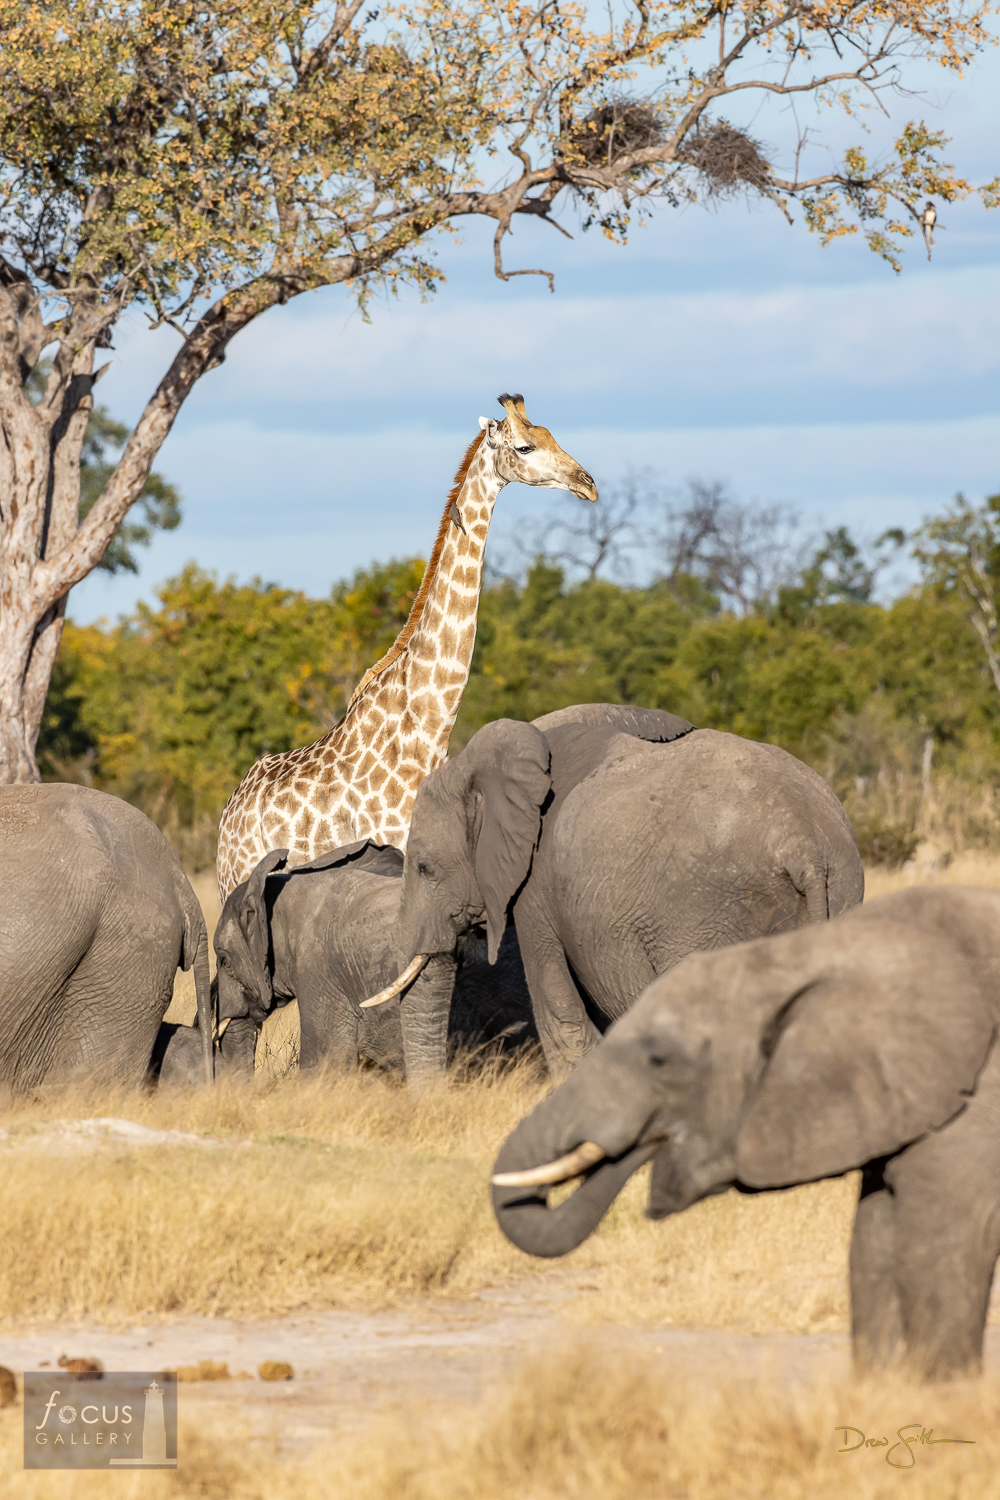 A Southern Giraffe stands among browsing African Elephants in Somalisa.